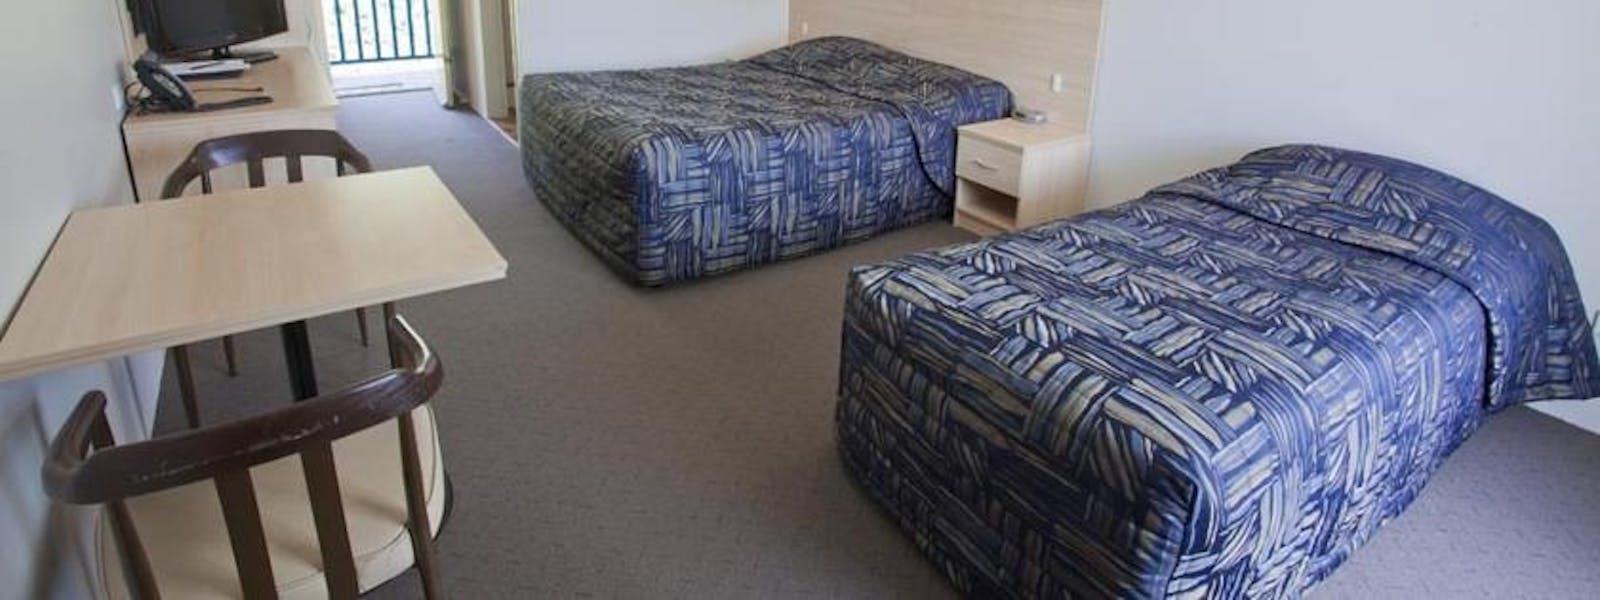 Twin share with ensuite room queen bed single bed Shellharbour Resort